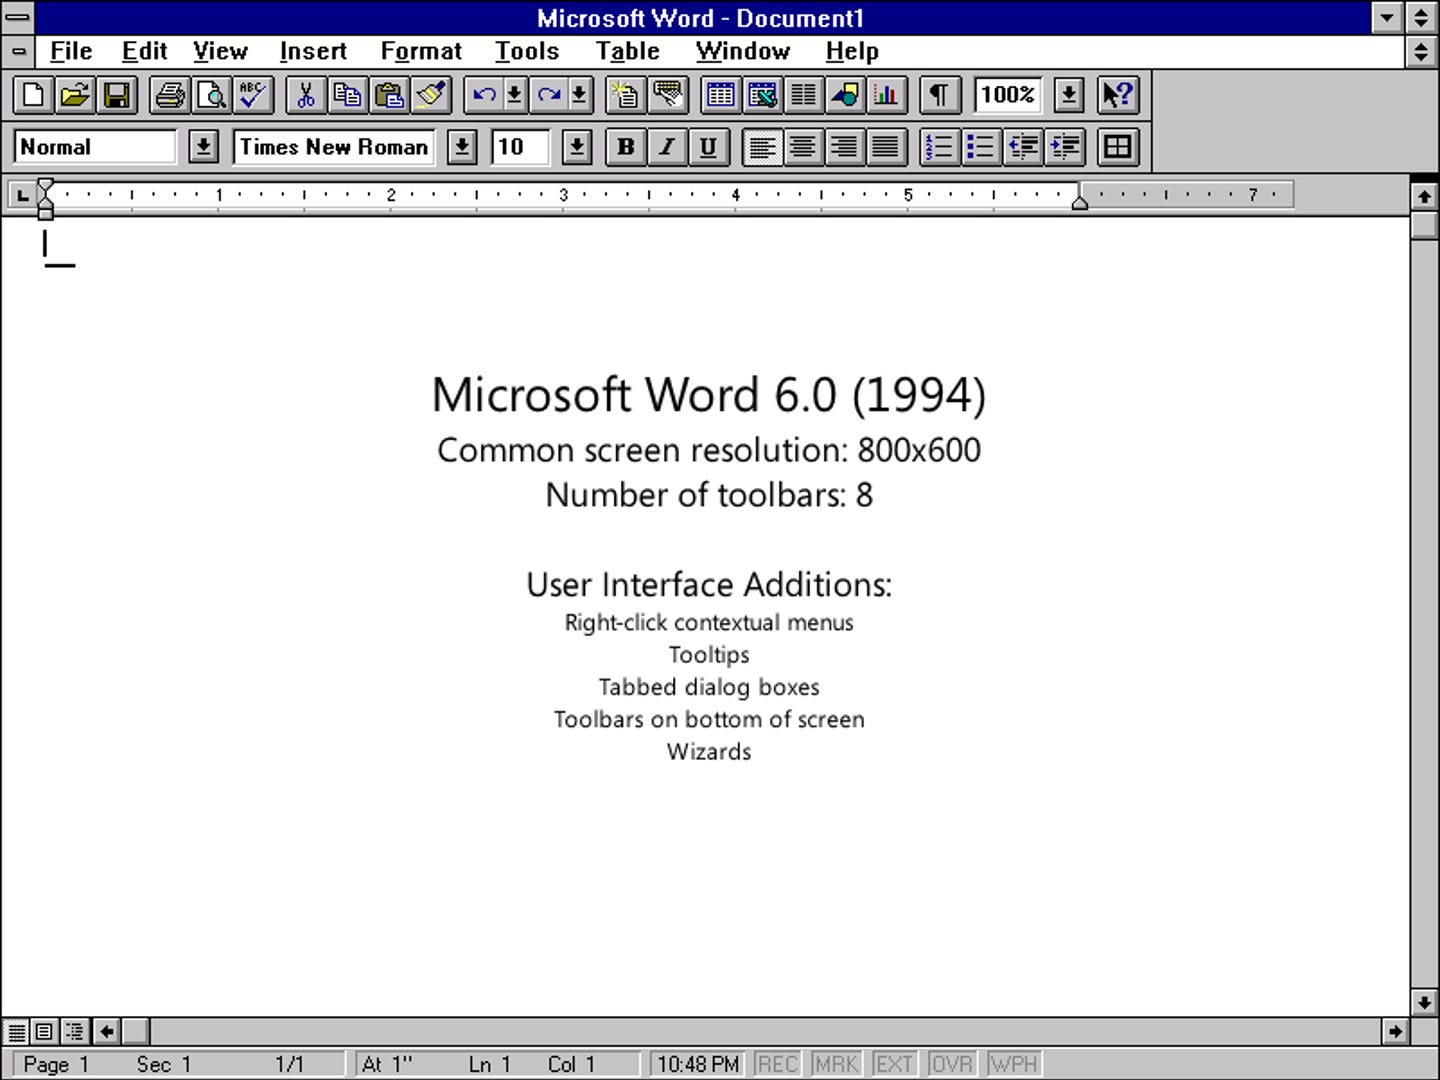 Microsoft Word 6.0 (1994) Common screen resolution: 800x600 Number of toolbars: 8 User Interface Additions: Right-click contextual menus Tooltips Tabbed dialog boxes Toolbars on bottom of screen Wizards